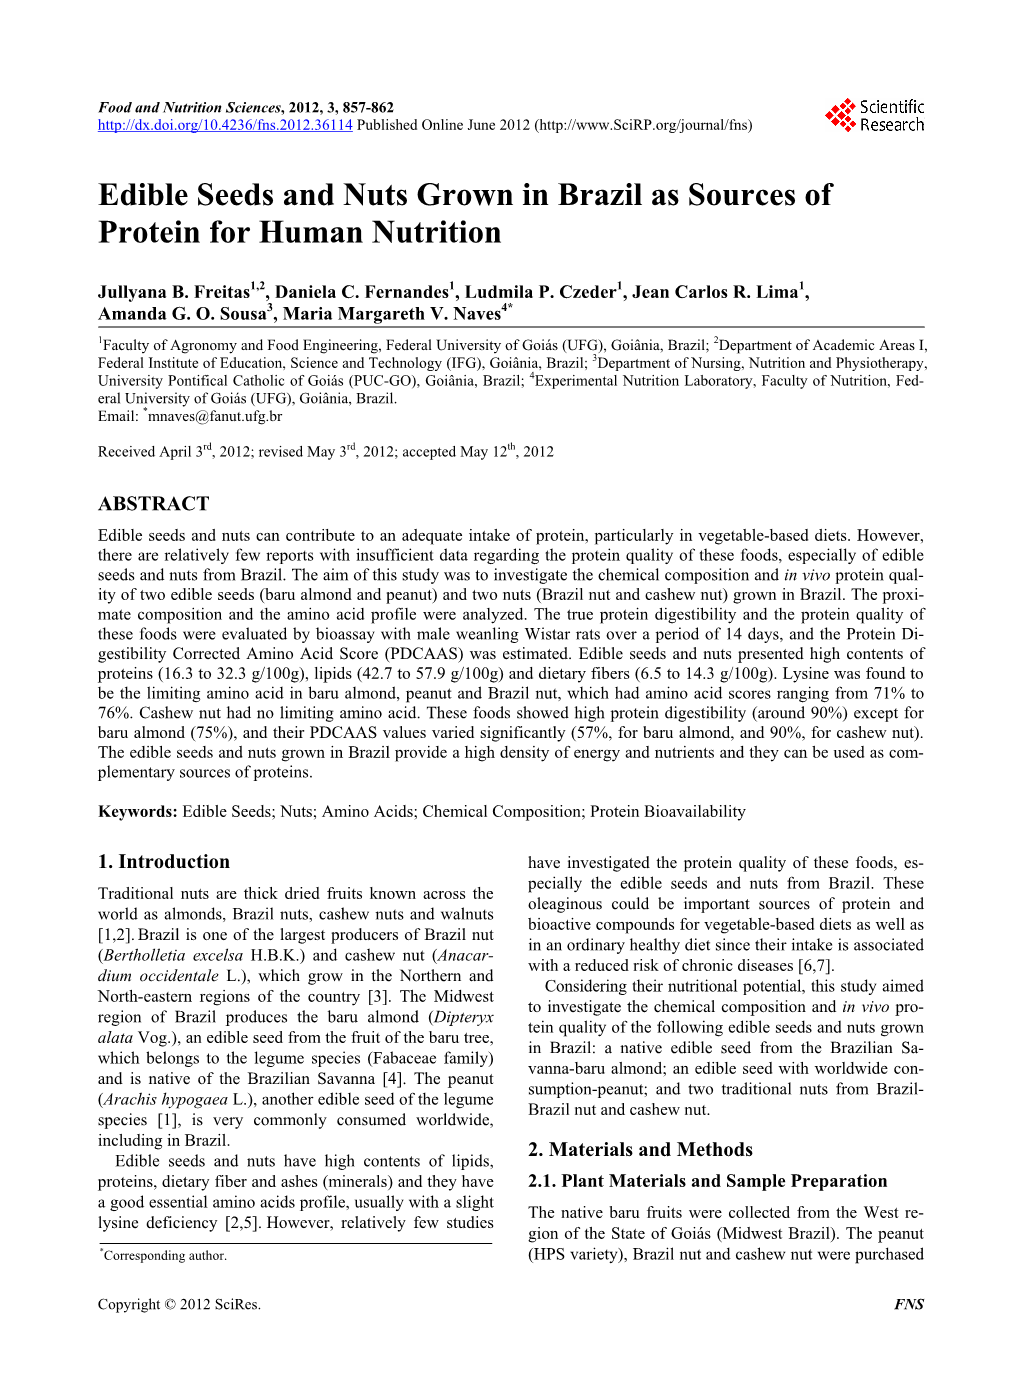 Edible Seeds and Nuts Grown in Brazil As Sources of Protein for Human Nutrition